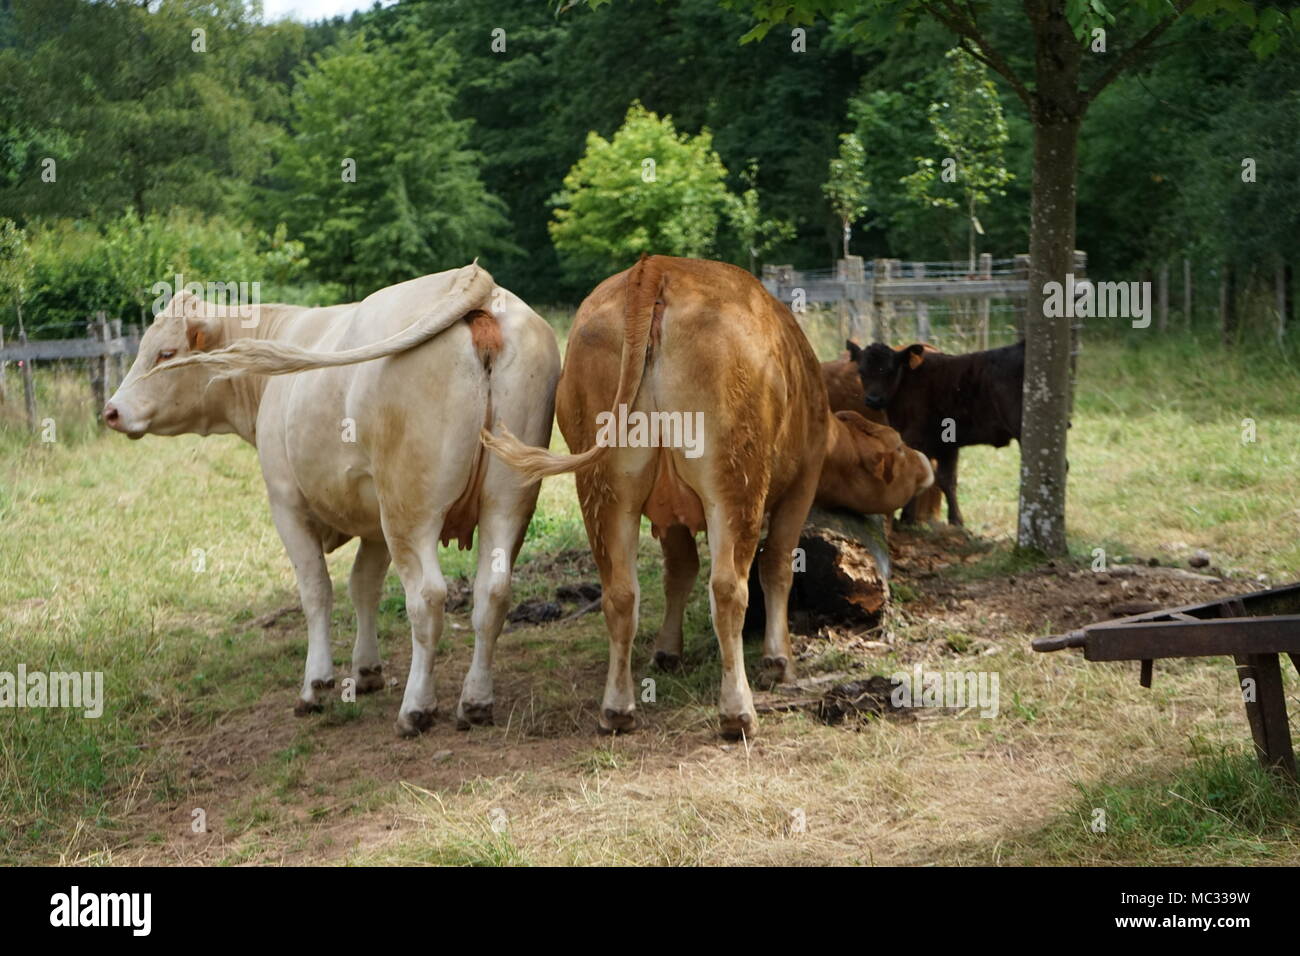 Brown and White Cows with a Calf out at Pasture, cow rubbing at a tree, Germany Stock Photo